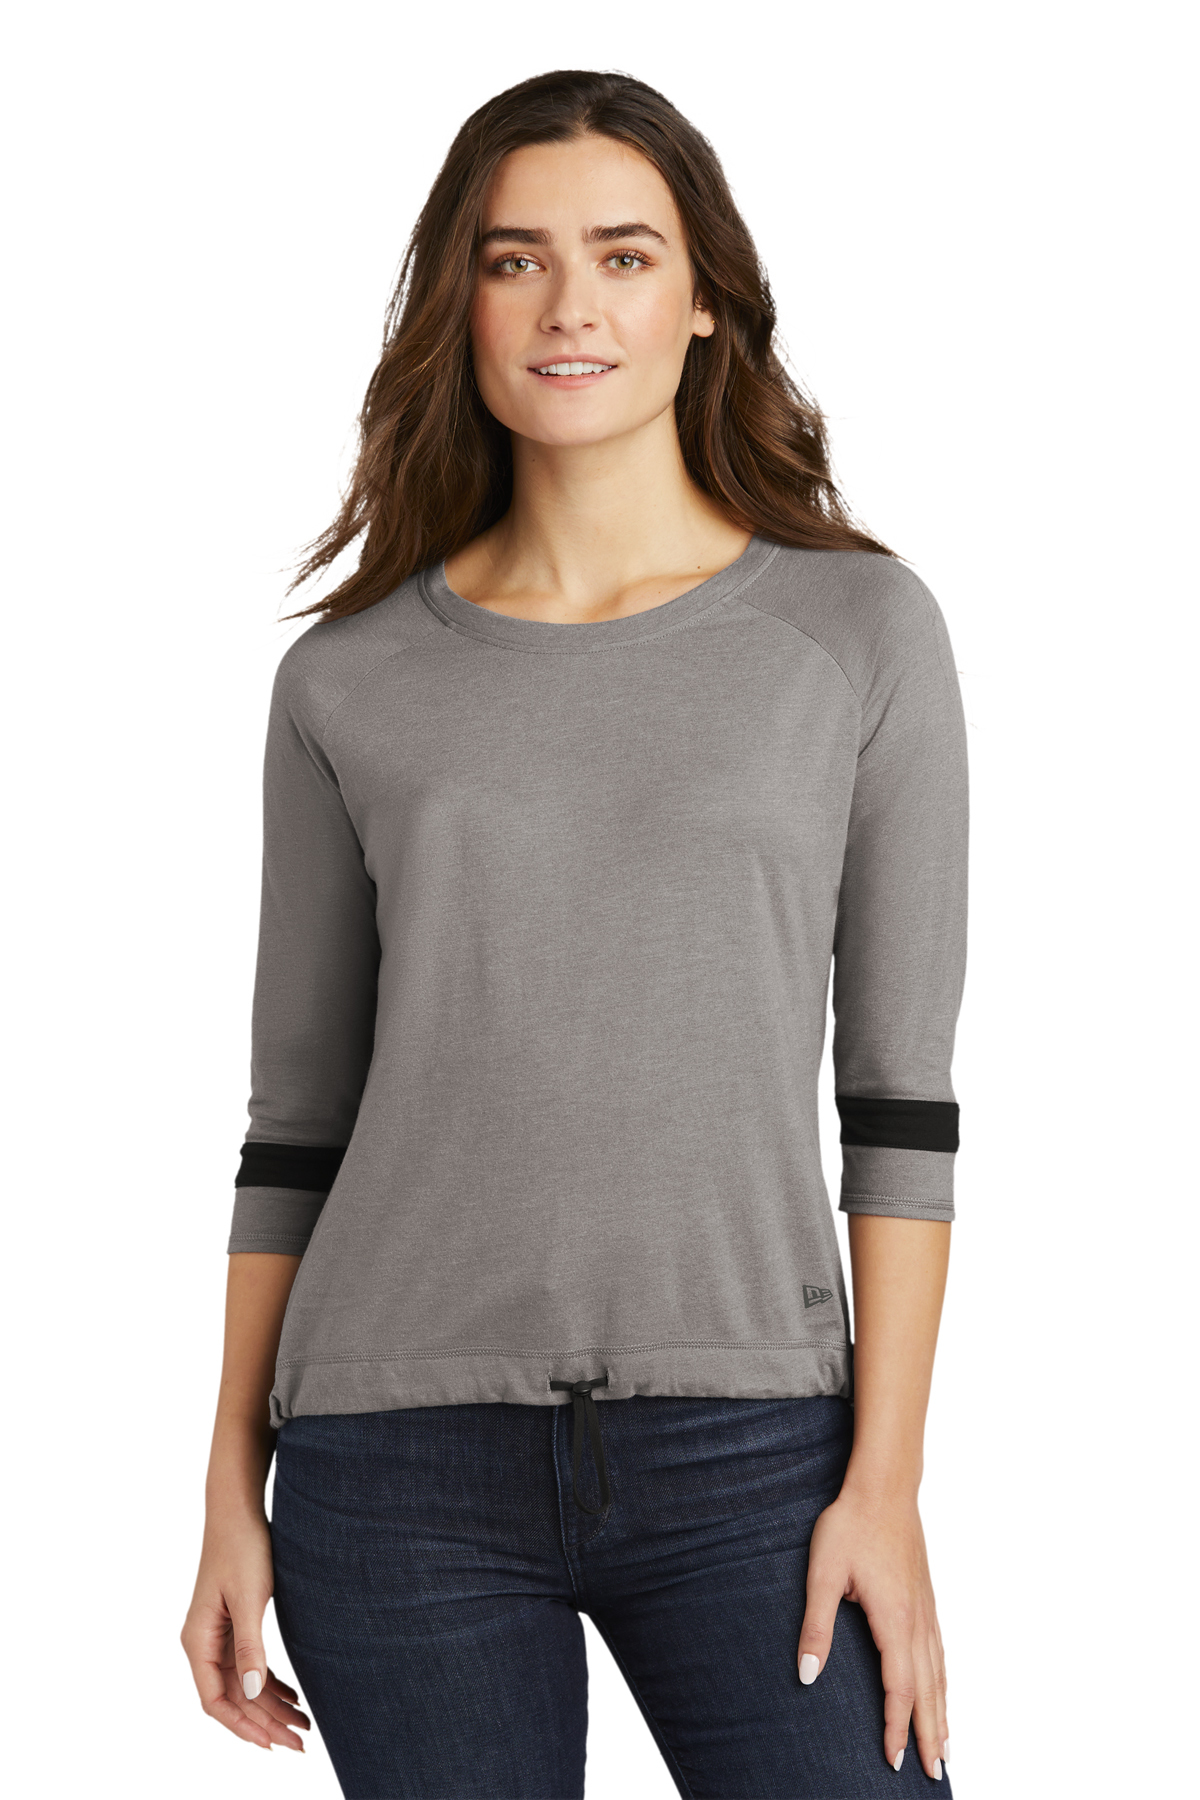 New Era Ladies Tri-Blend 3/4-Sleeve Tee | Product | Company Casuals